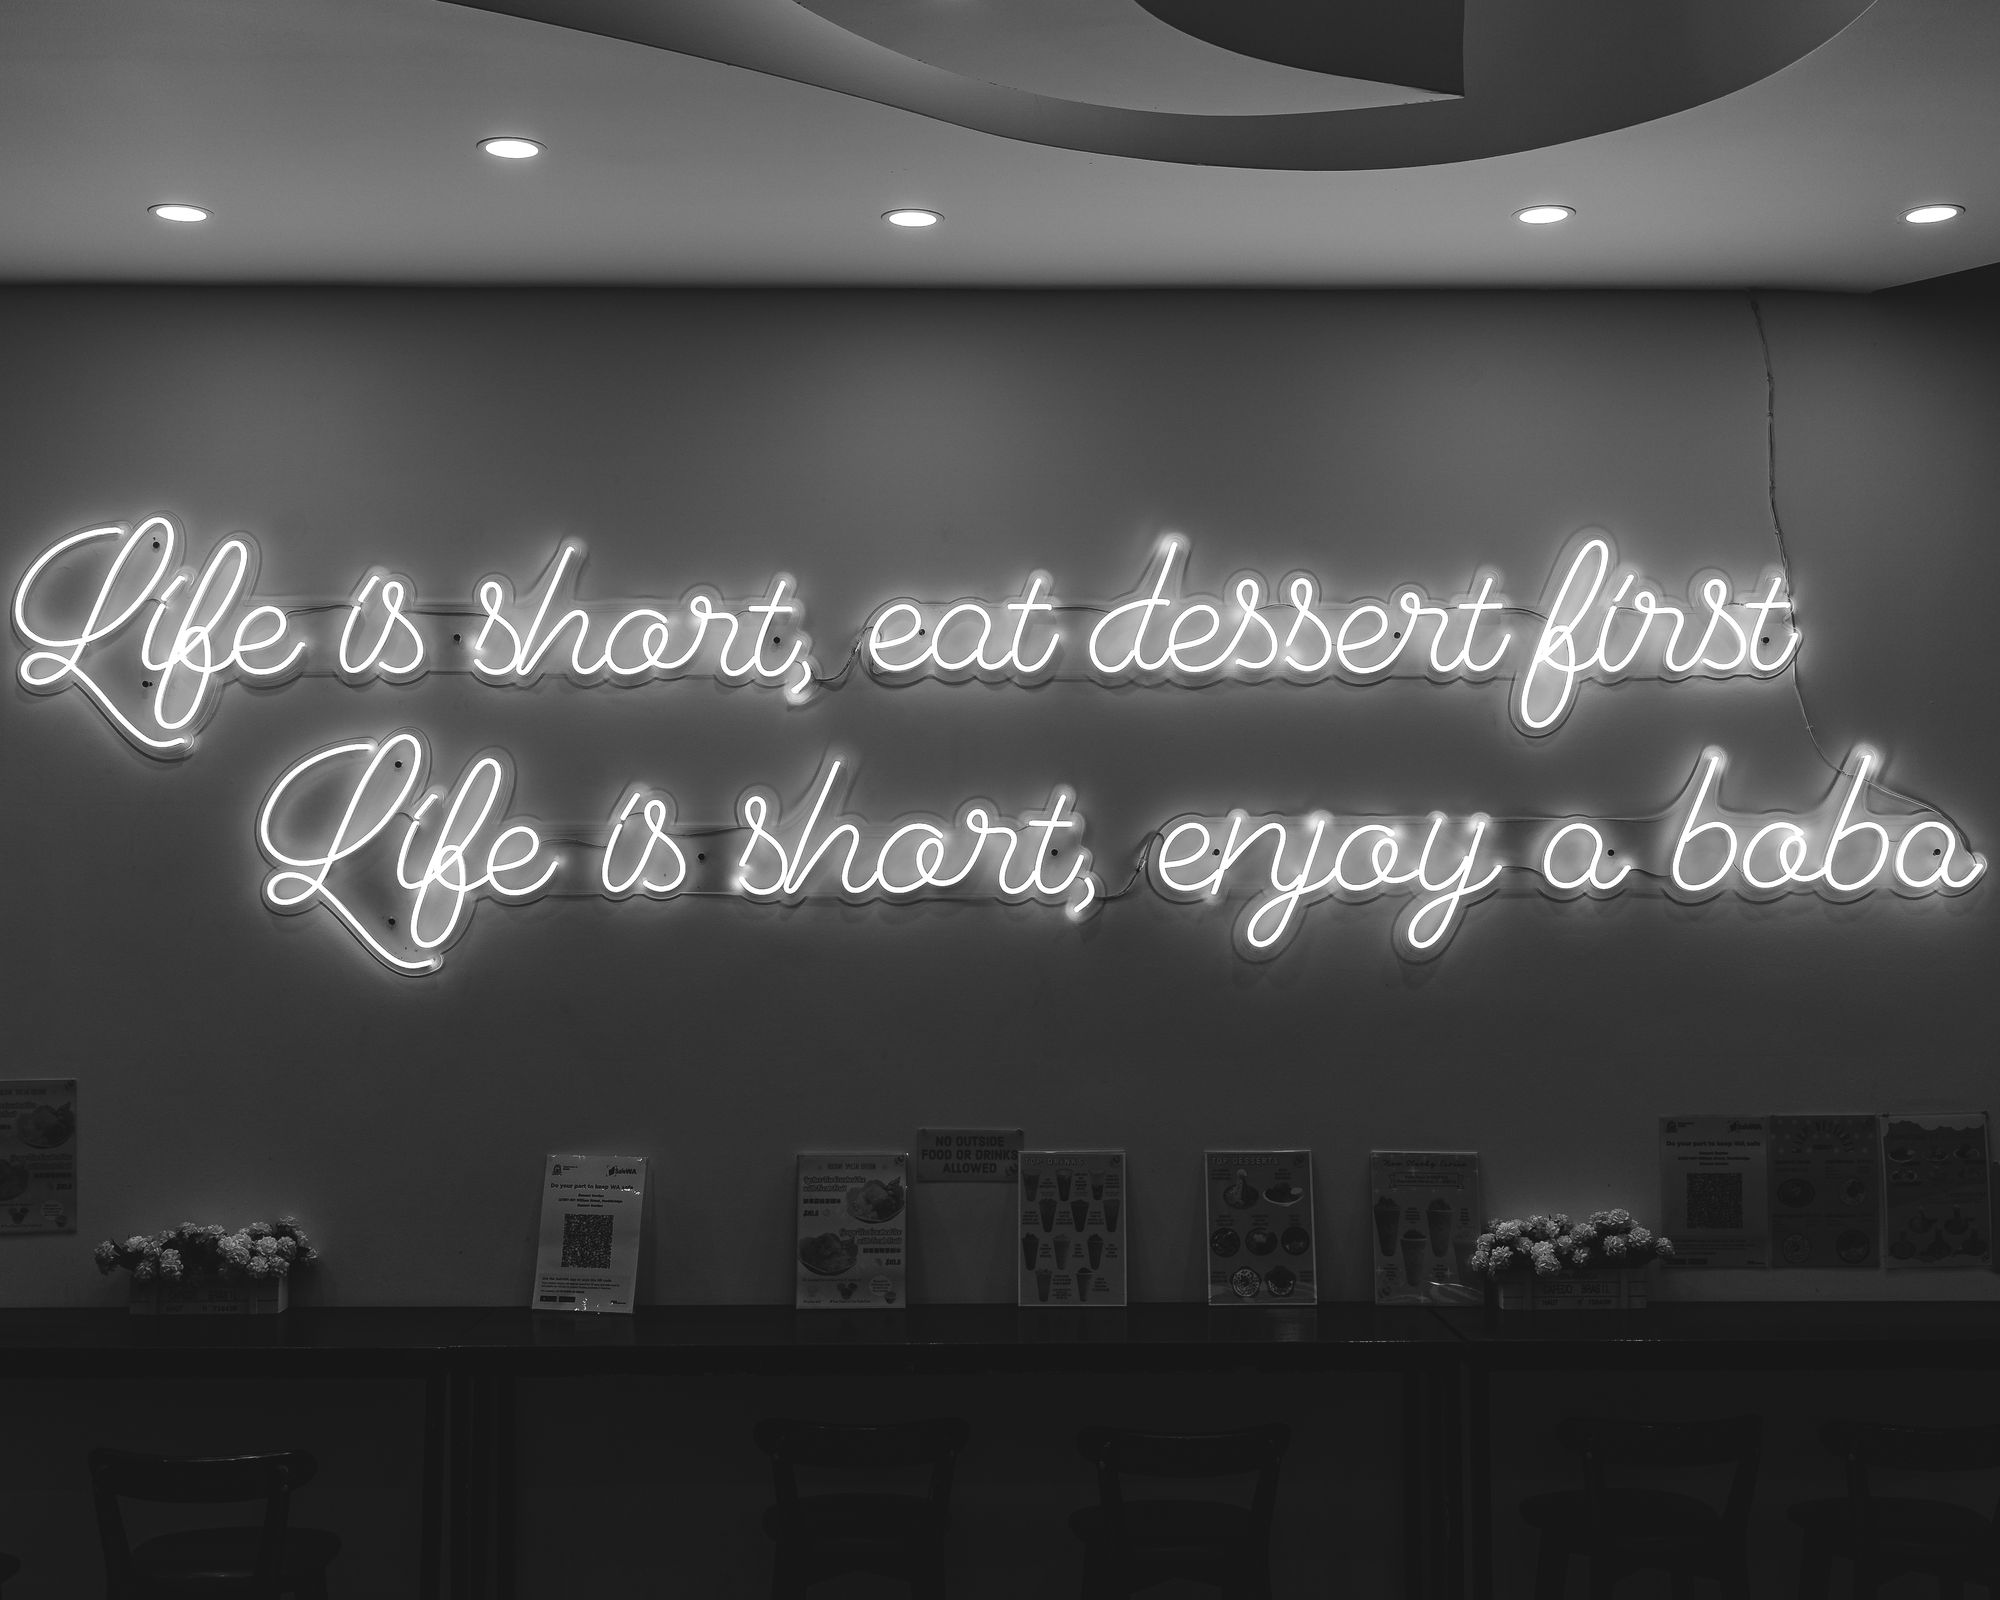 Black and white photo with a sign saying "life is short, eat dessert first.Life is short, enjoy a boba"